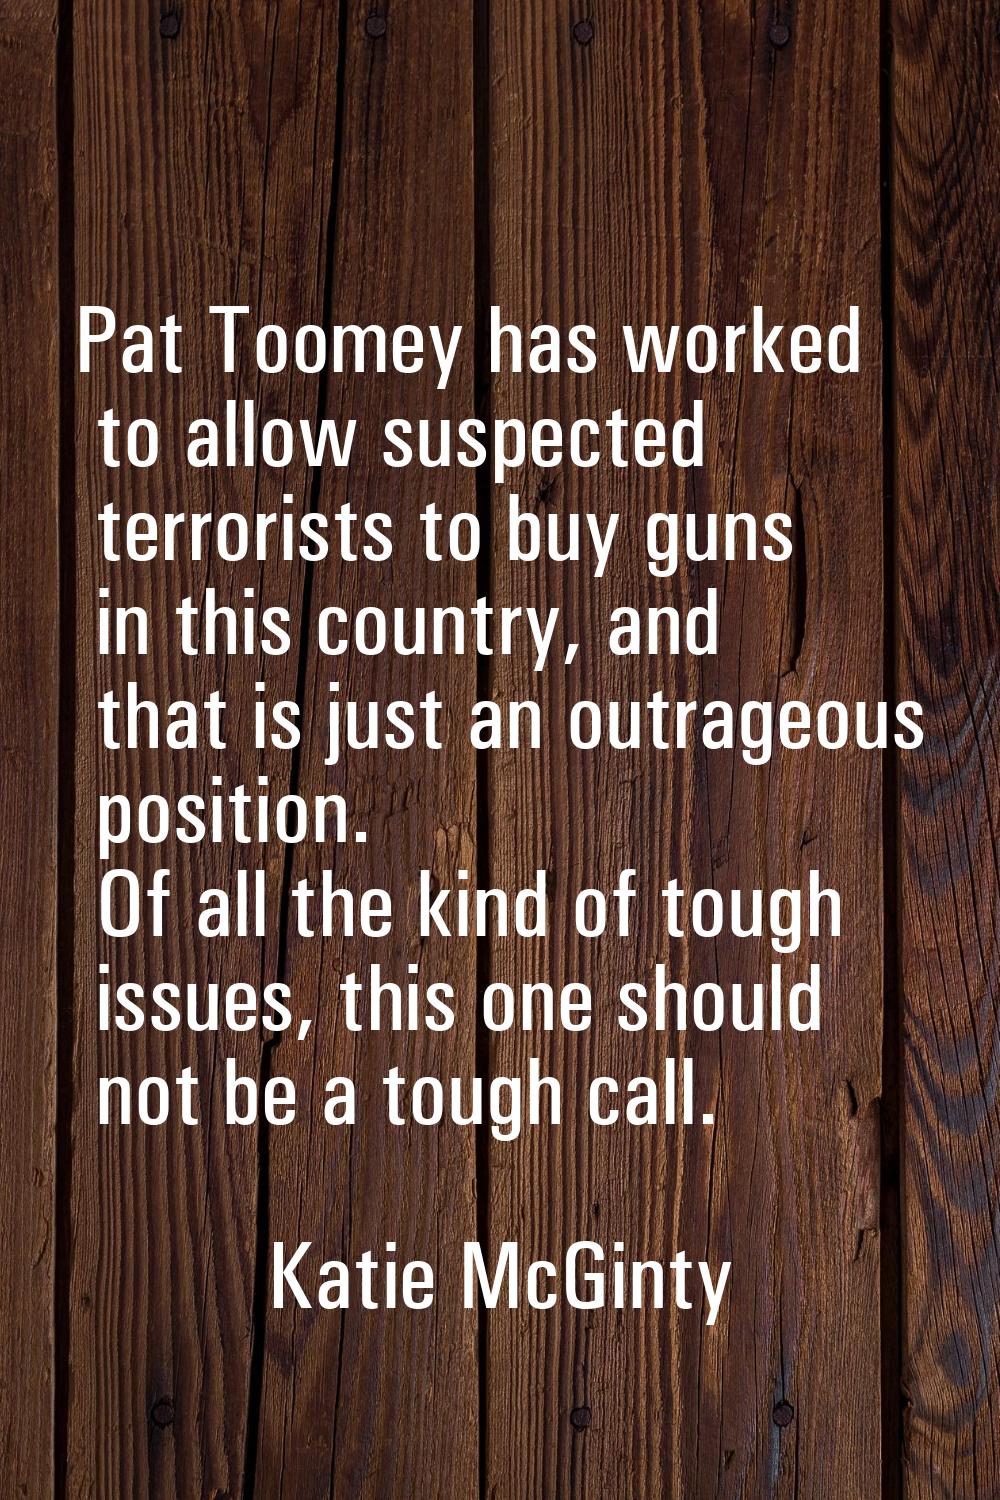 Pat Toomey has worked to allow suspected terrorists to buy guns in this country, and that is just a